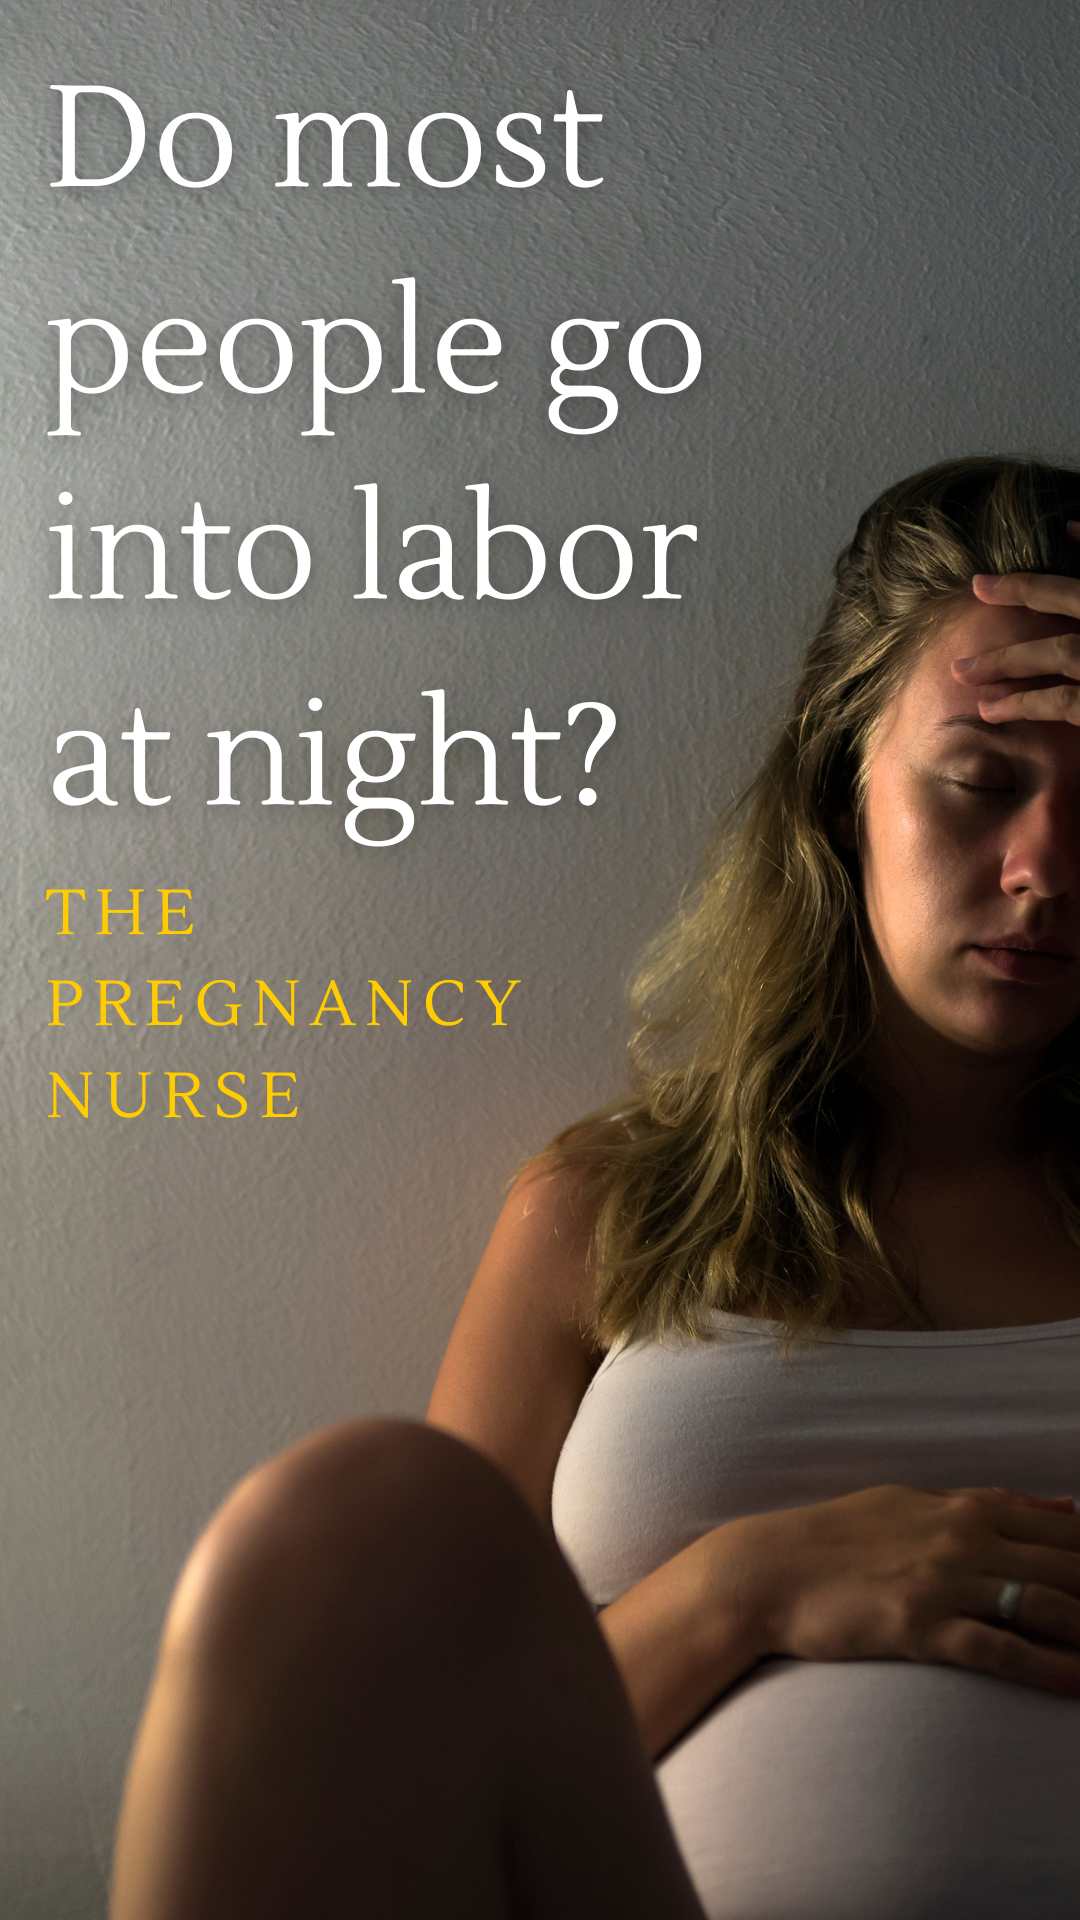 Did you know that most women go into labor at night? Find out the reasons behind this intriguing phenomenon and how it might affect your childbirth experience.